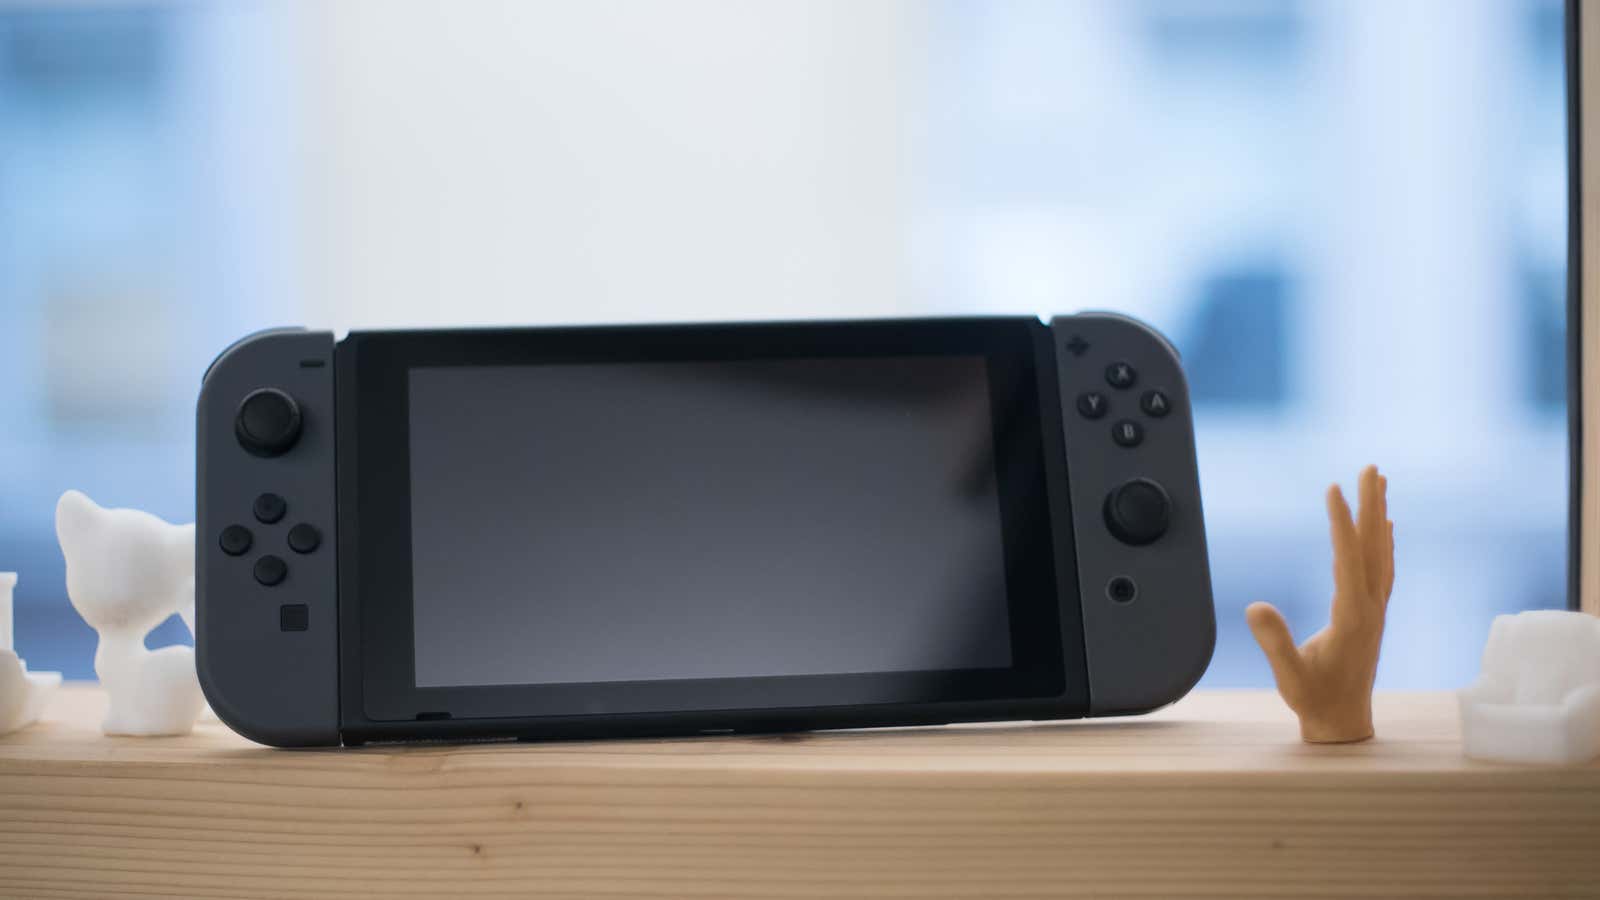 Proving the Wii U is Better Than the Nintendo Switch 